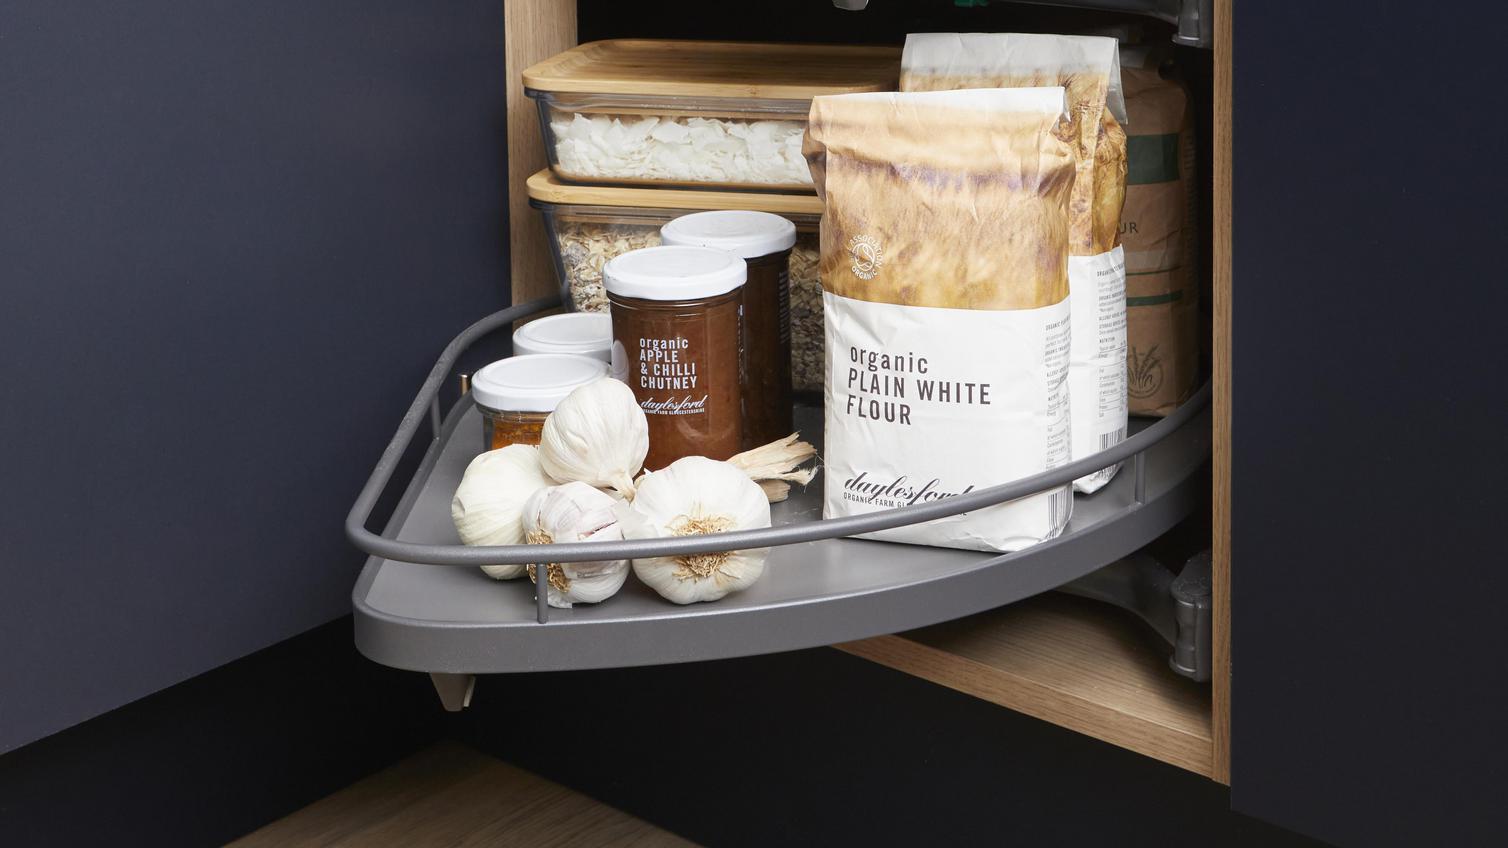 Integrated pull-out storage accessory is fitted into a corner kitchen cabinet. The storage features dried goods & food tins.